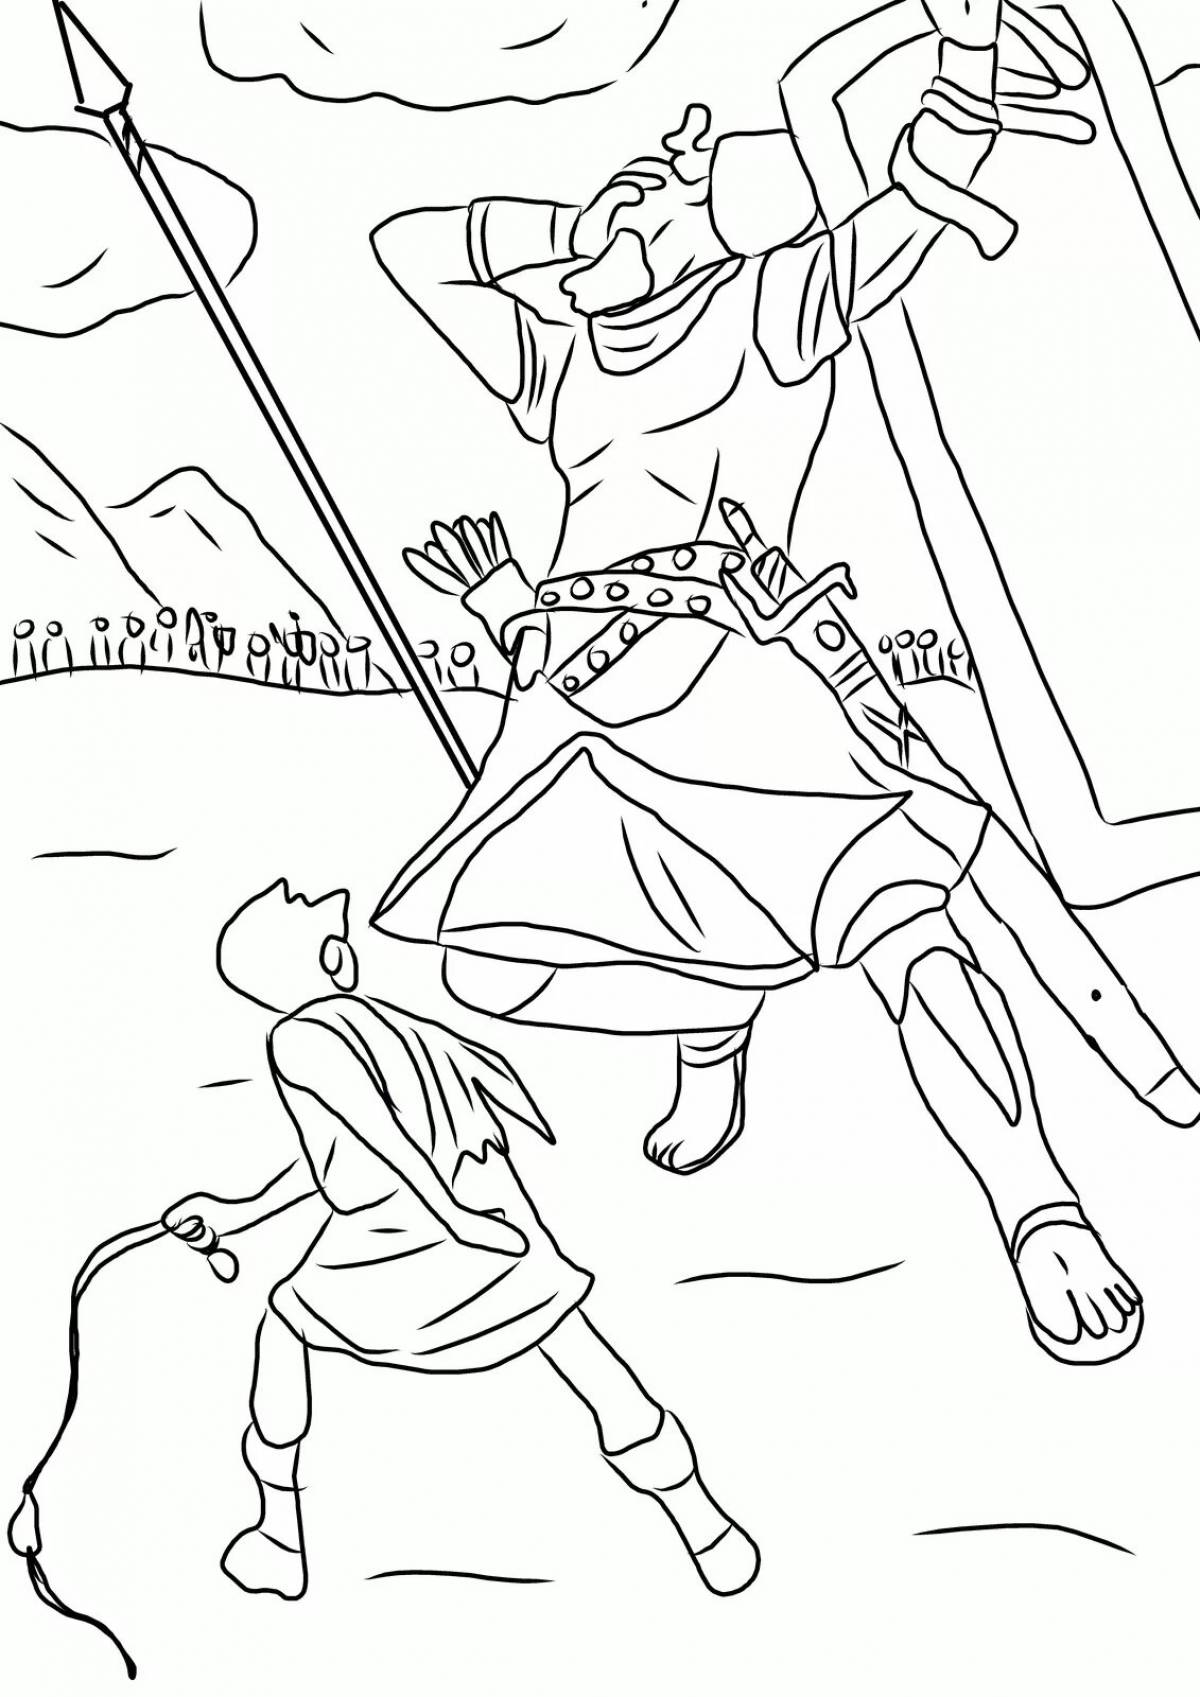 Playful david and goliath coloring page